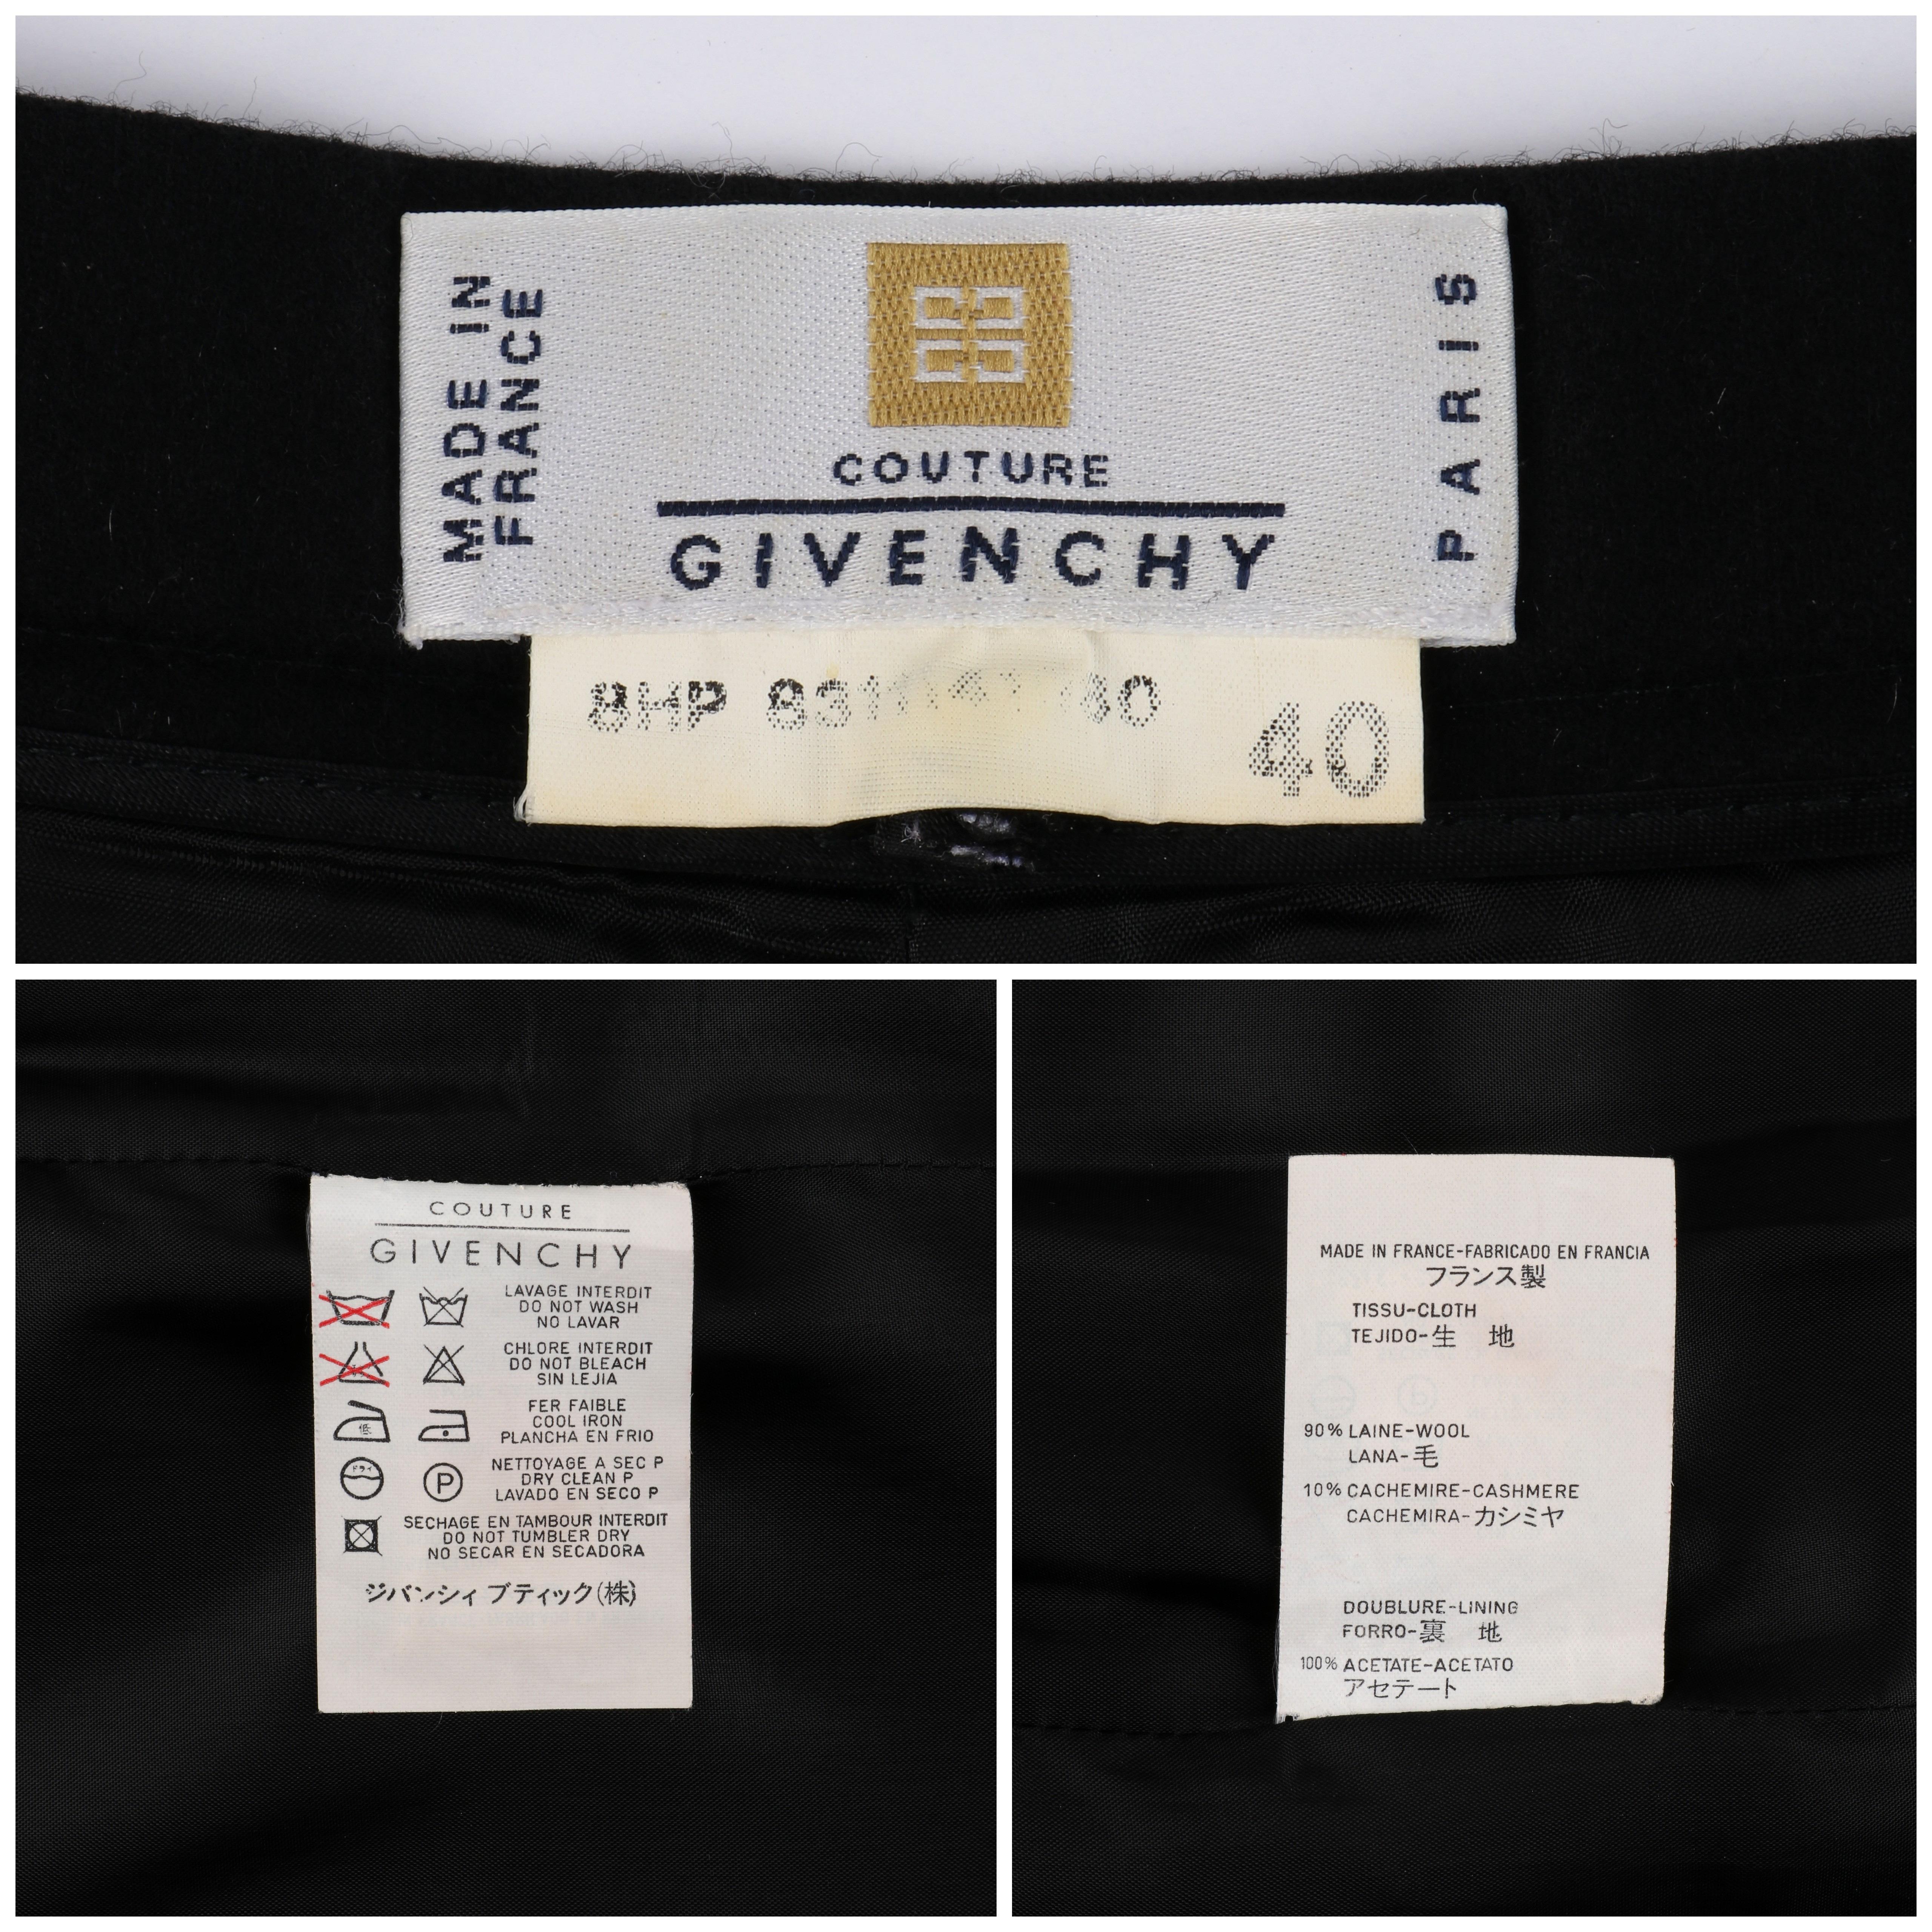 GIVENCHY Couture A/W 1998 ALEXANDER McQUEEN Black Straight Leg Trouser Pants In Fair Condition For Sale In Thiensville, WI